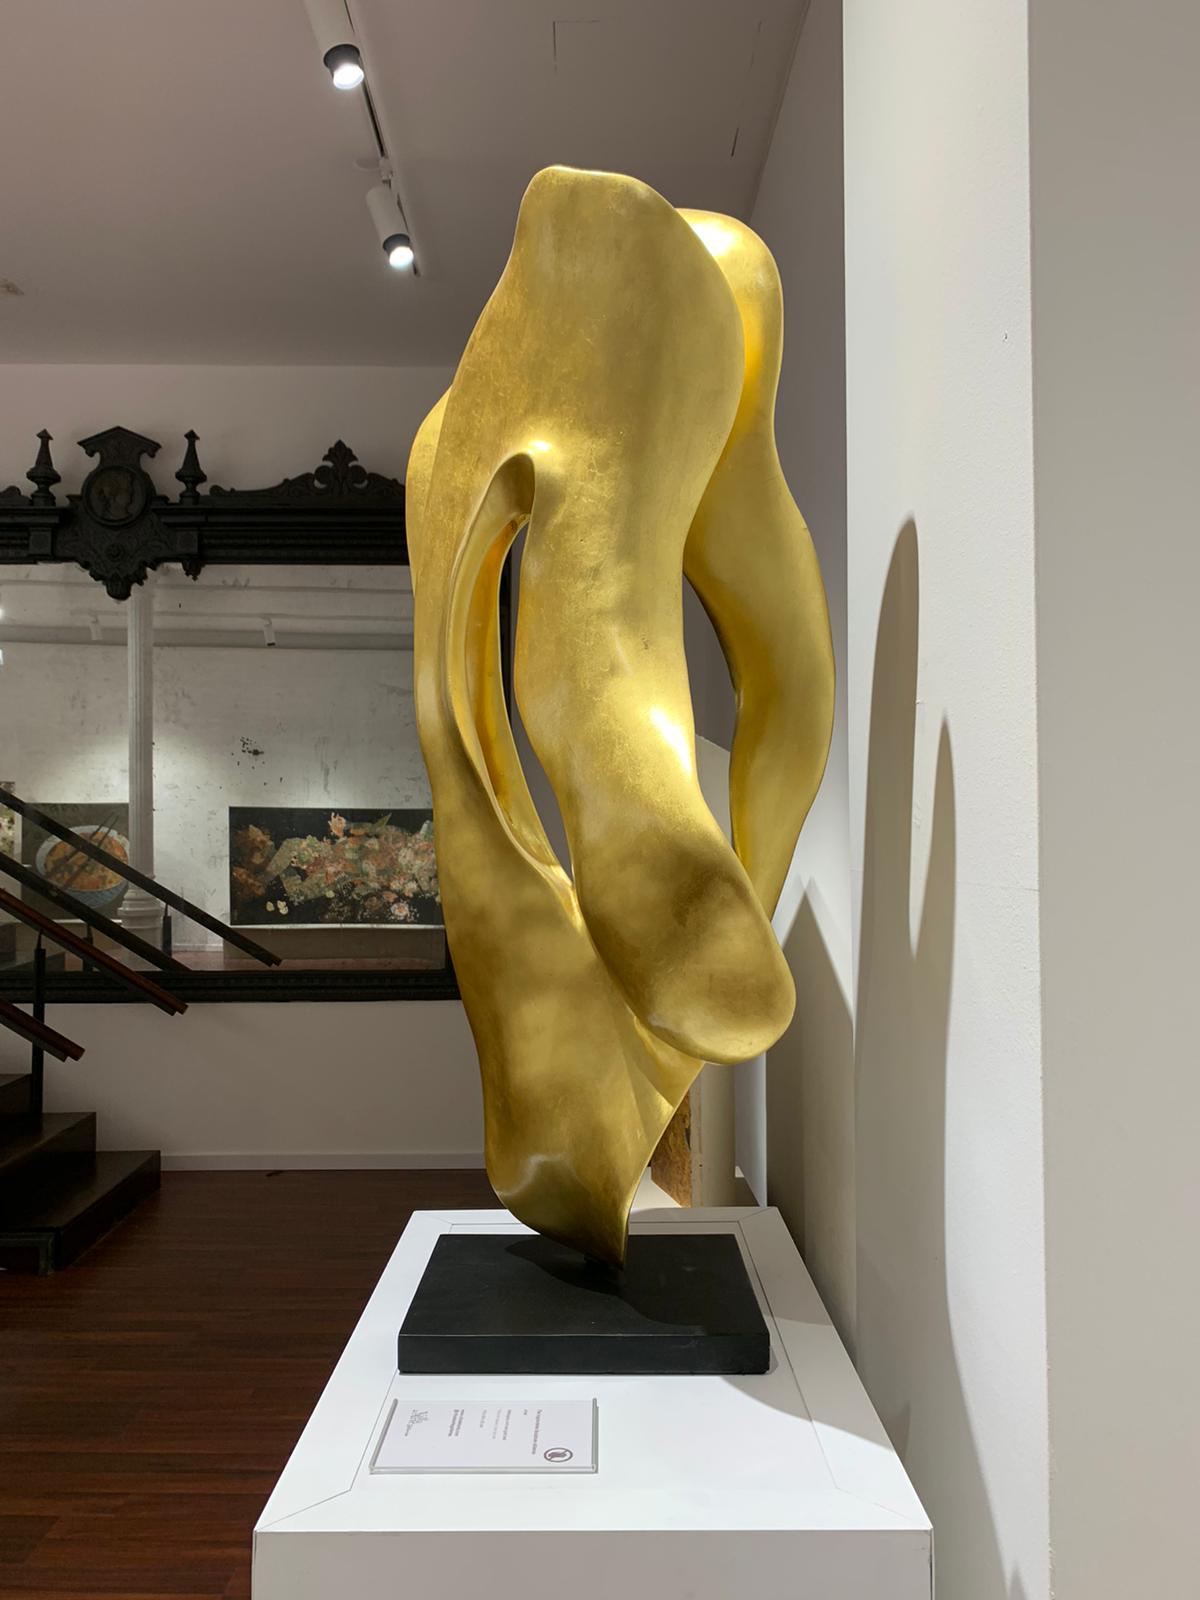 Mahogany roots with gold leaf

The Ingravidesa Sculpture Alliance is formed by an international group of sculptors and designers who collaborate to create abstract sculpture inspired by nature. They often work together for months on monumental